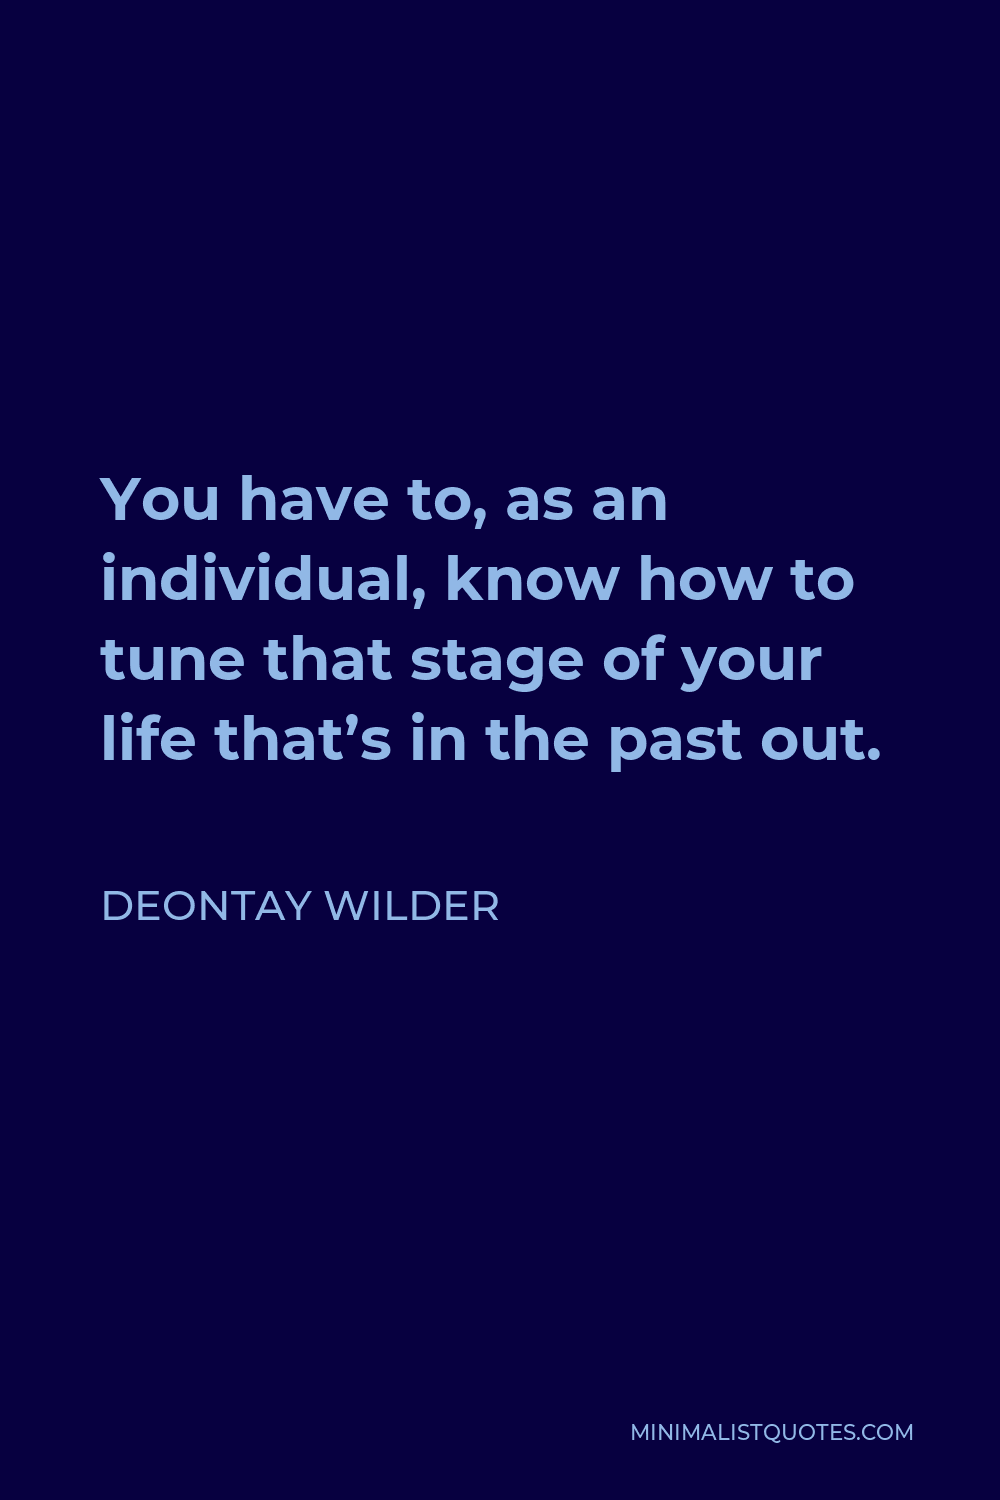 Deontay Wilder Quote - You have to, as an individual, know how to tune that stage of your life that’s in the past out.